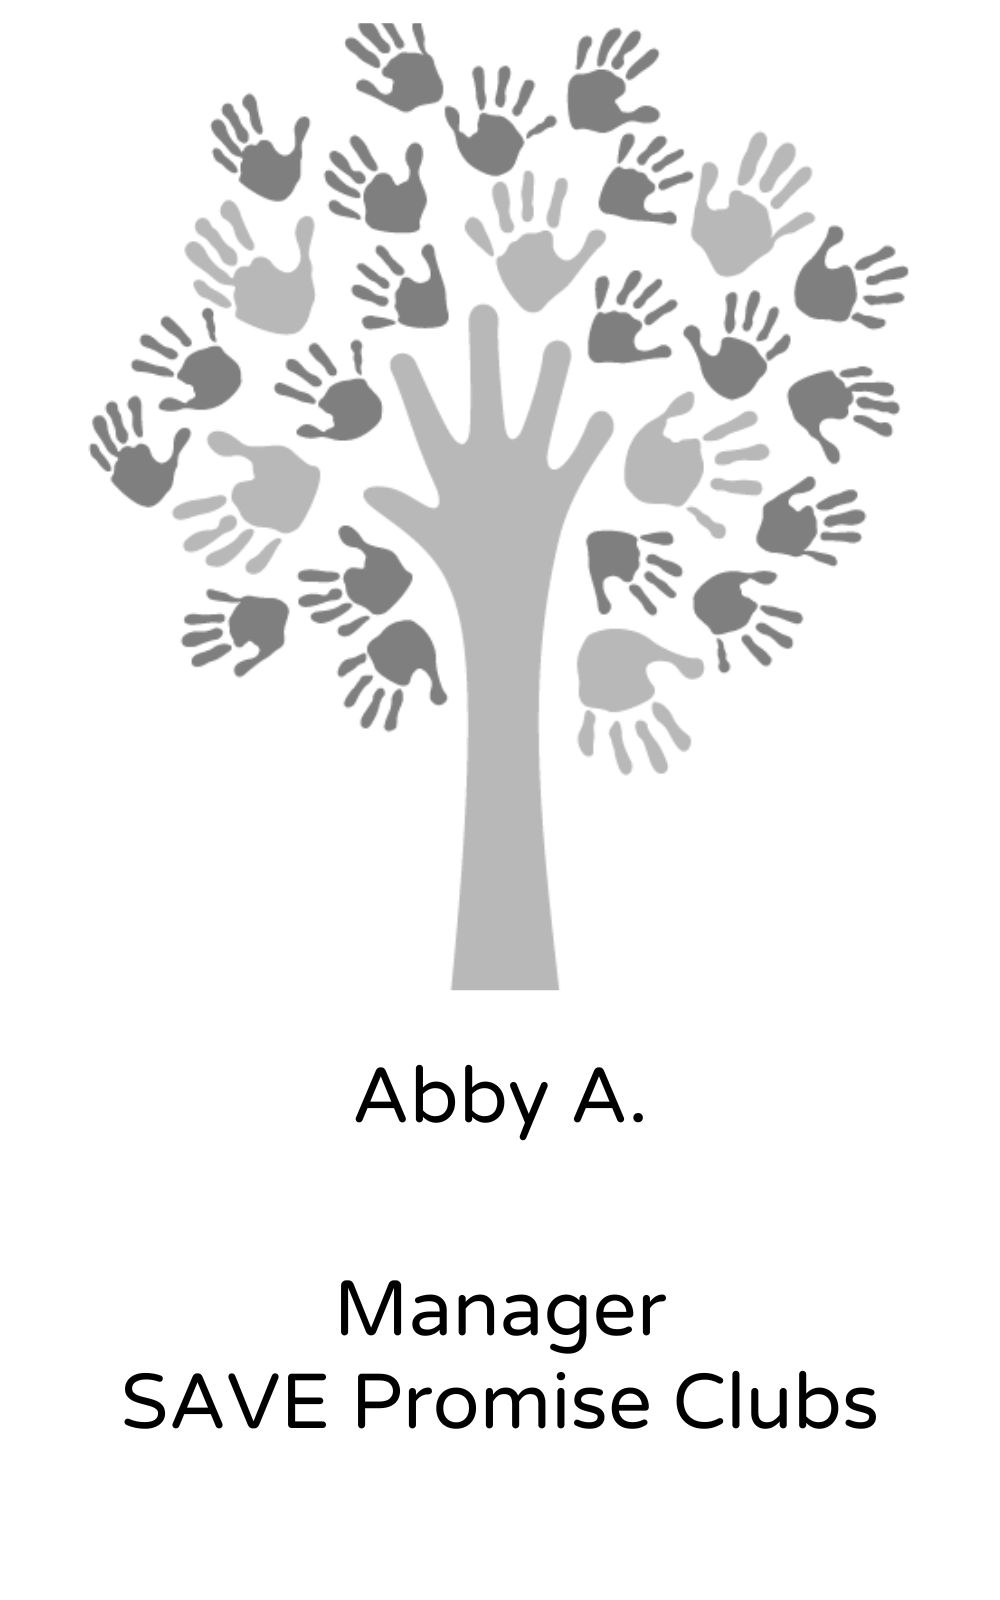 Abby A, Manager, SAVE Promise Clubs